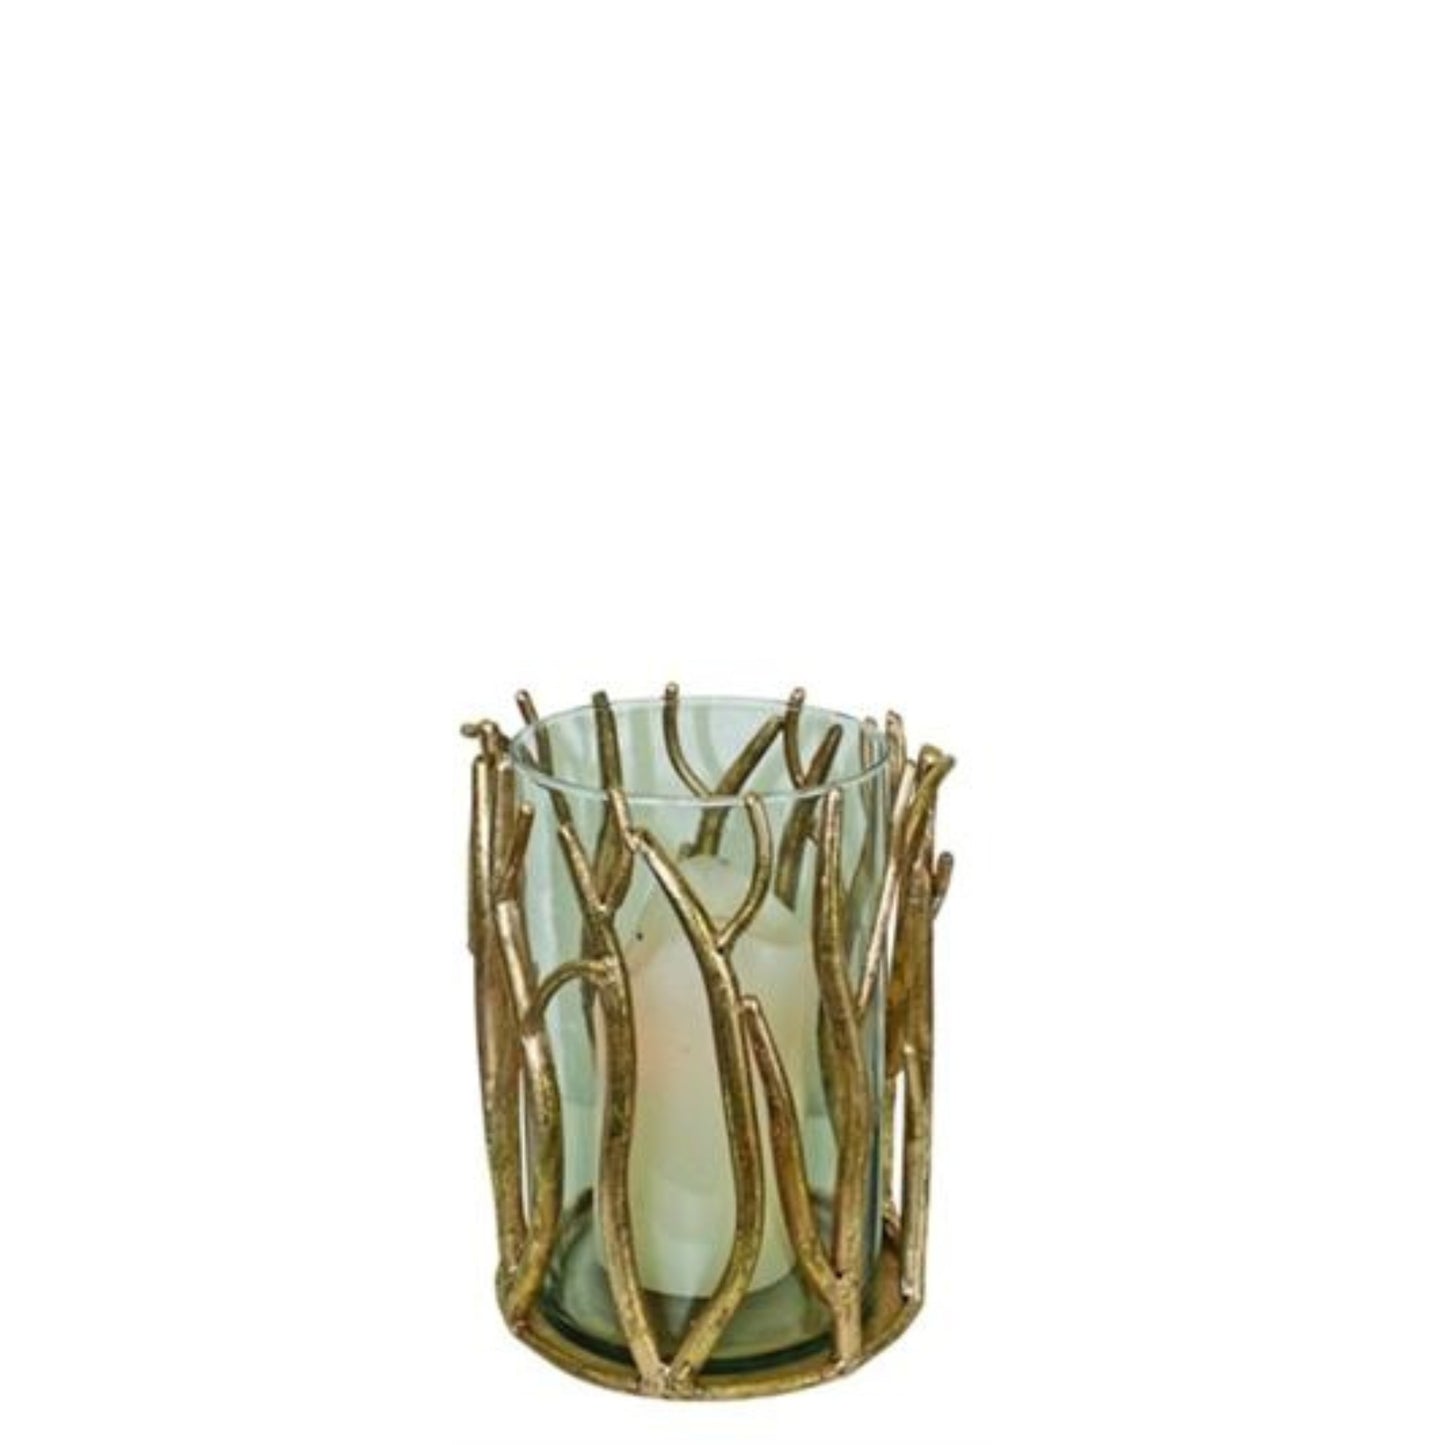 Italian Gold Iron Hurricanes - Twig Accent Iron & Glass Candle Holders - 3 Sizes to Choose From (Small Candle Holder pictured) | Beautiful estate quality home decor | INSIDE OUT | InsideOutCatalog.com